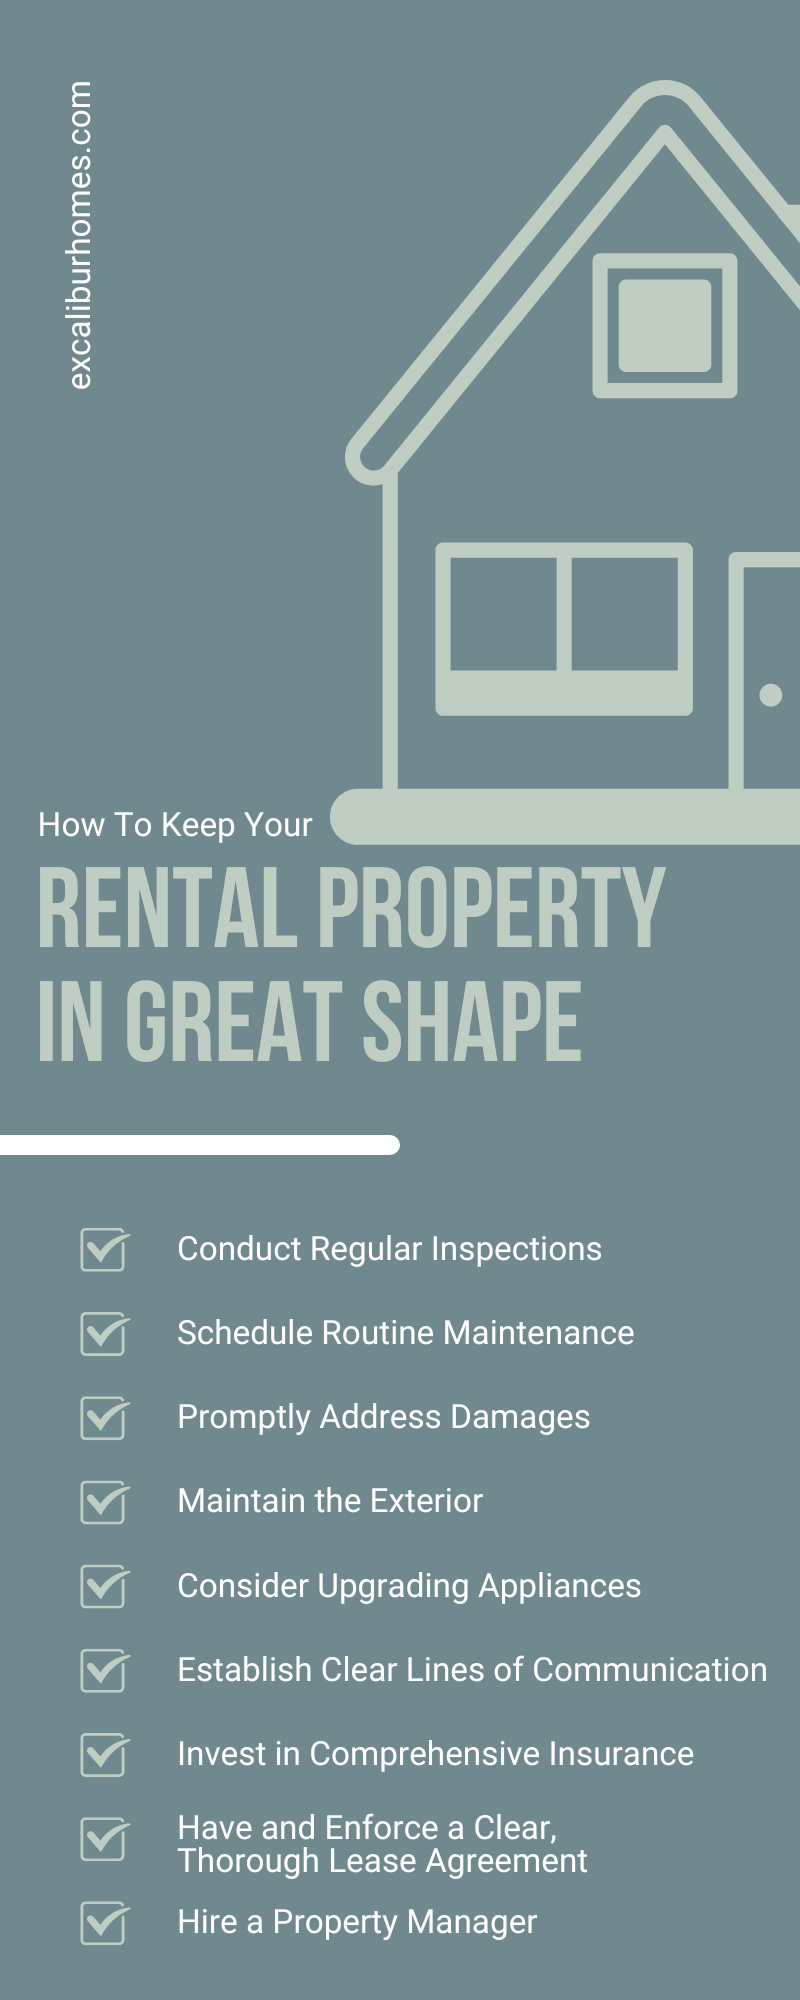 How To Keep Your Rental Property in Great Shape 